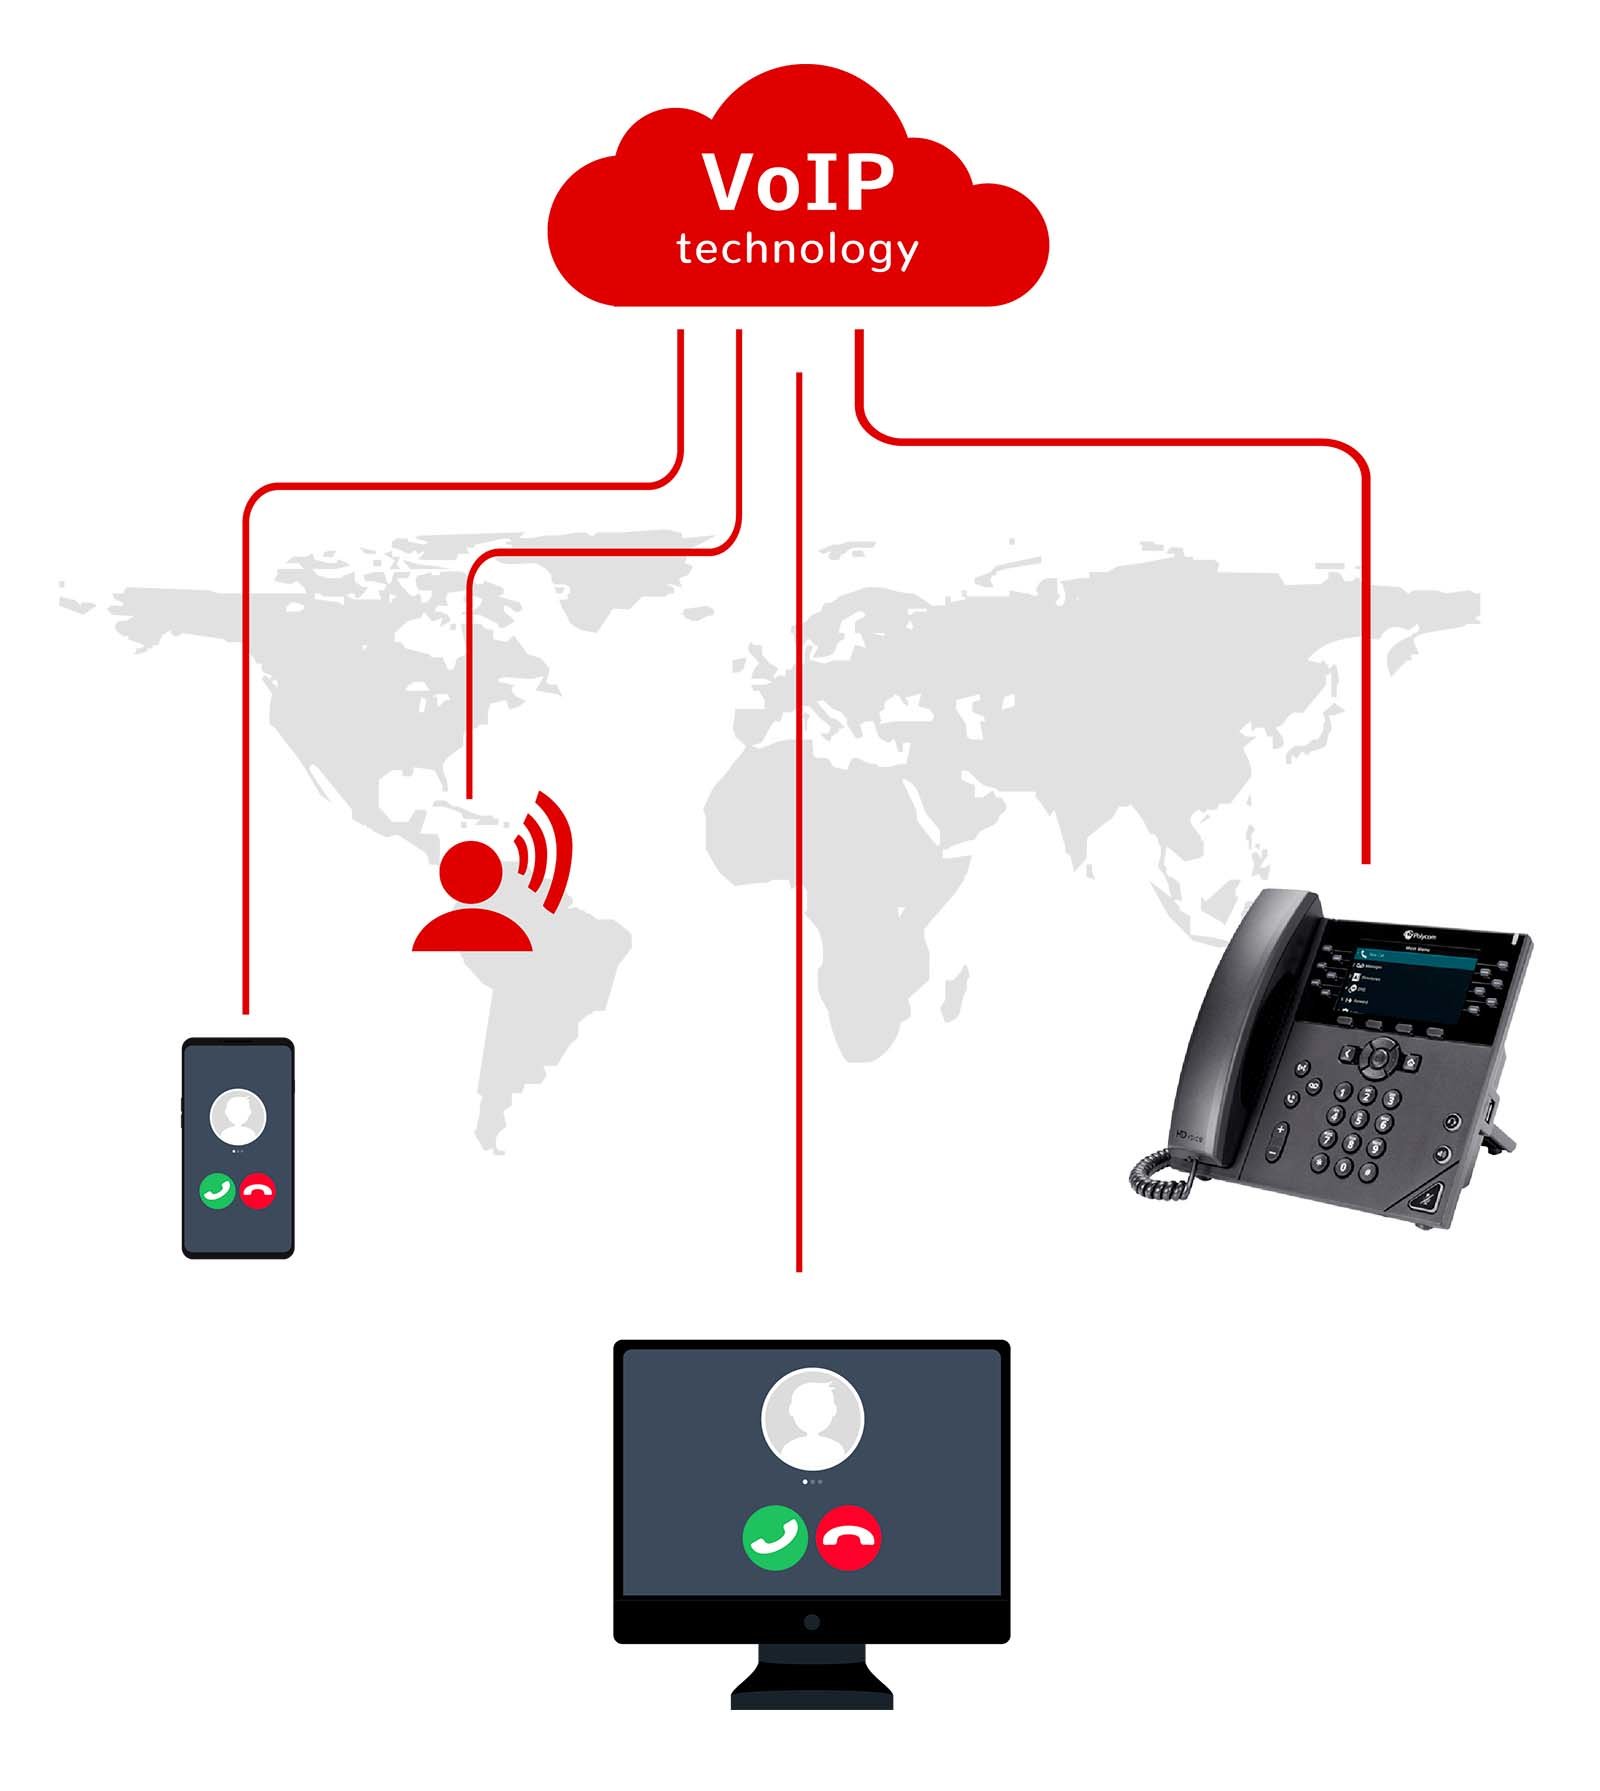 About coVoIP - Telecommunication services